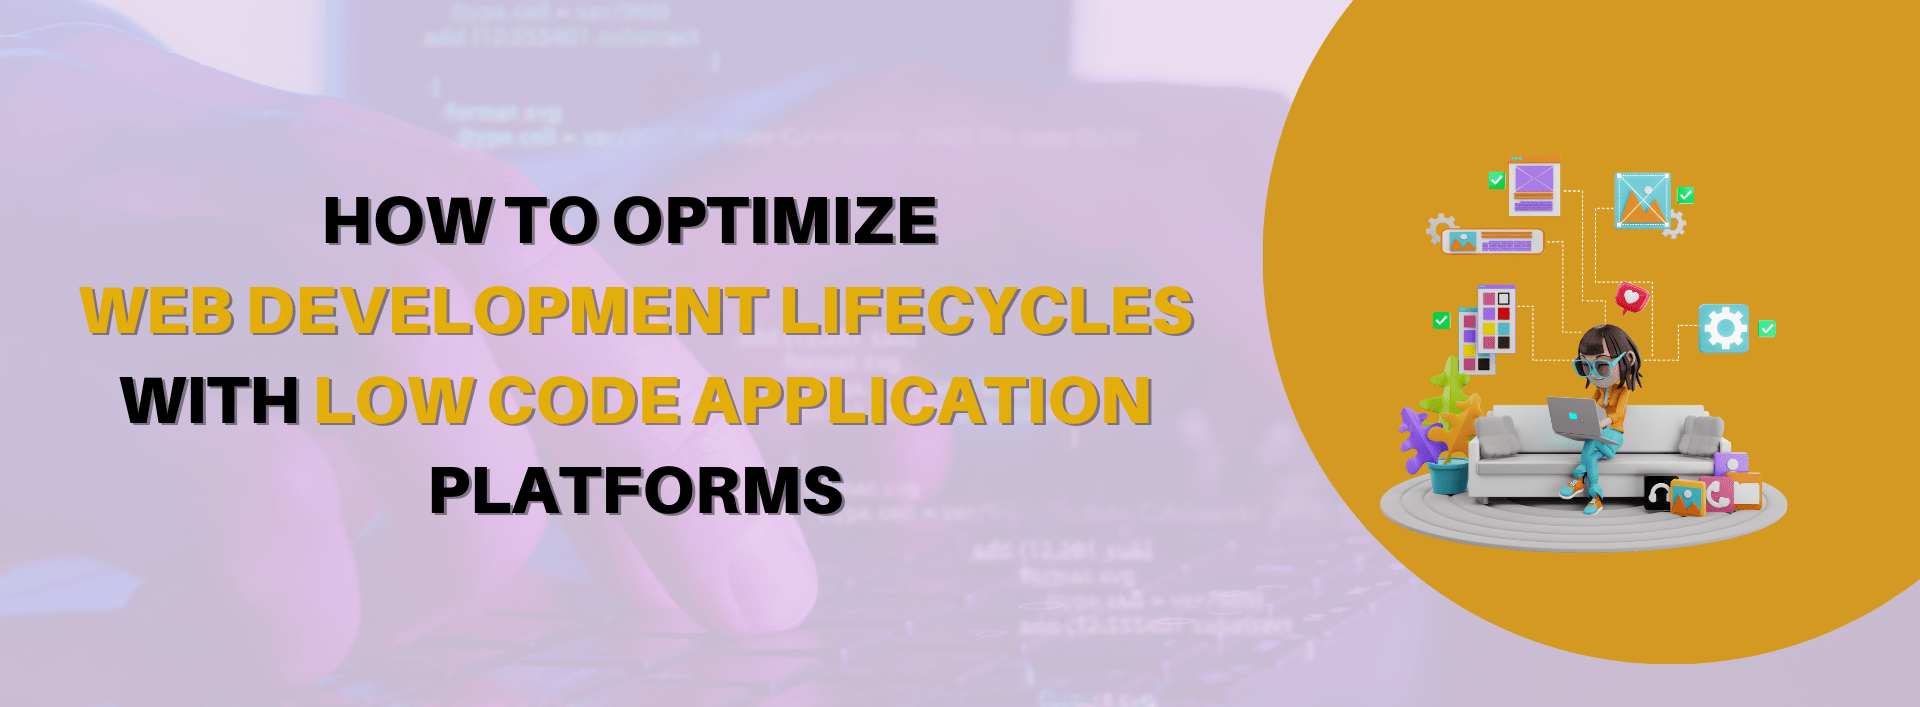 How to Optimize Web Development Lifecycles with Low Code Application Platforms